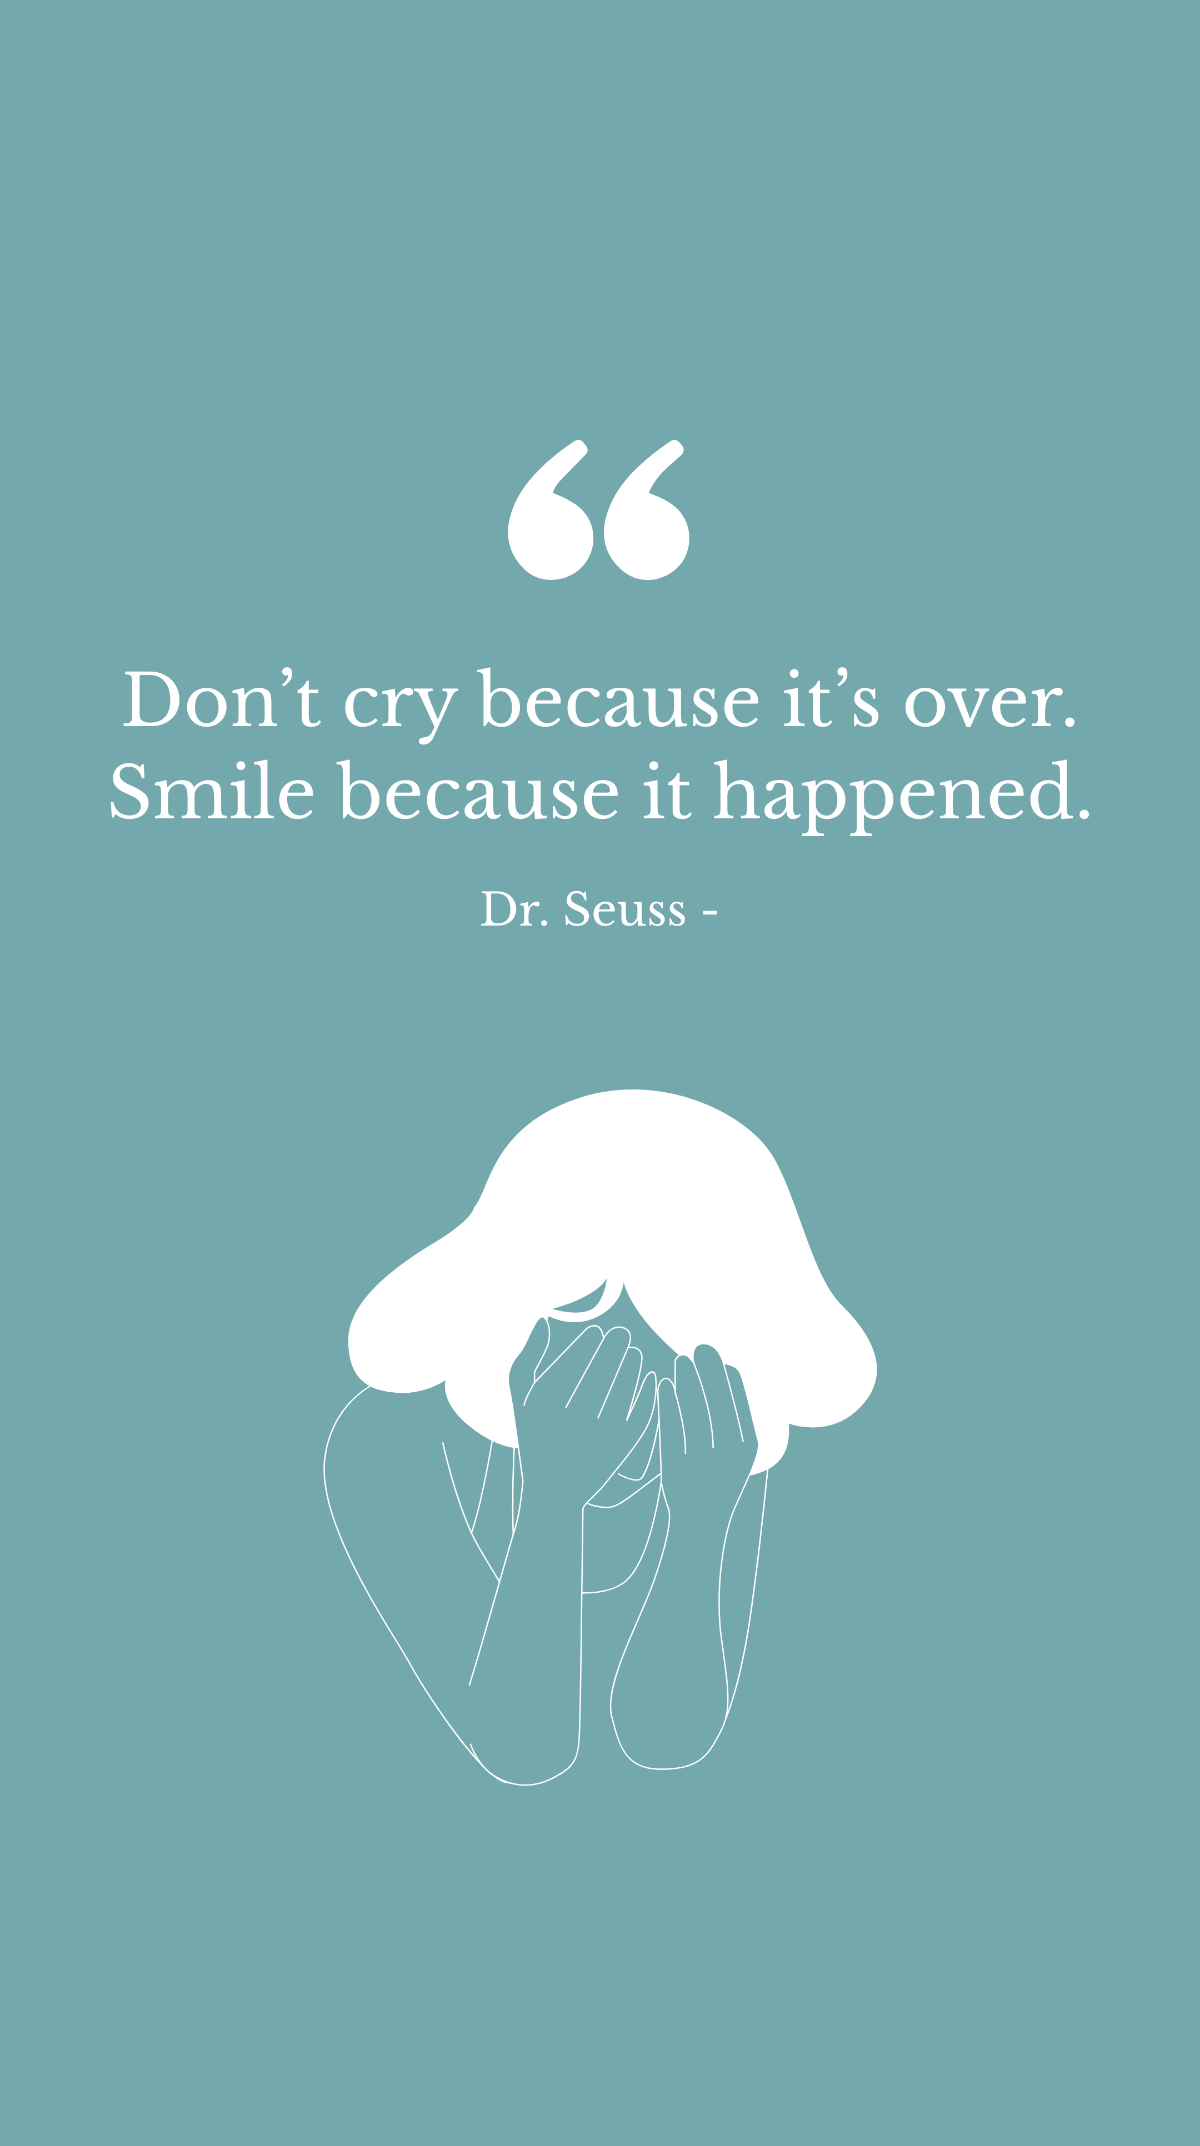 Dr. Seuss - Don’t cry because it’s over. Smile because it happened. Template